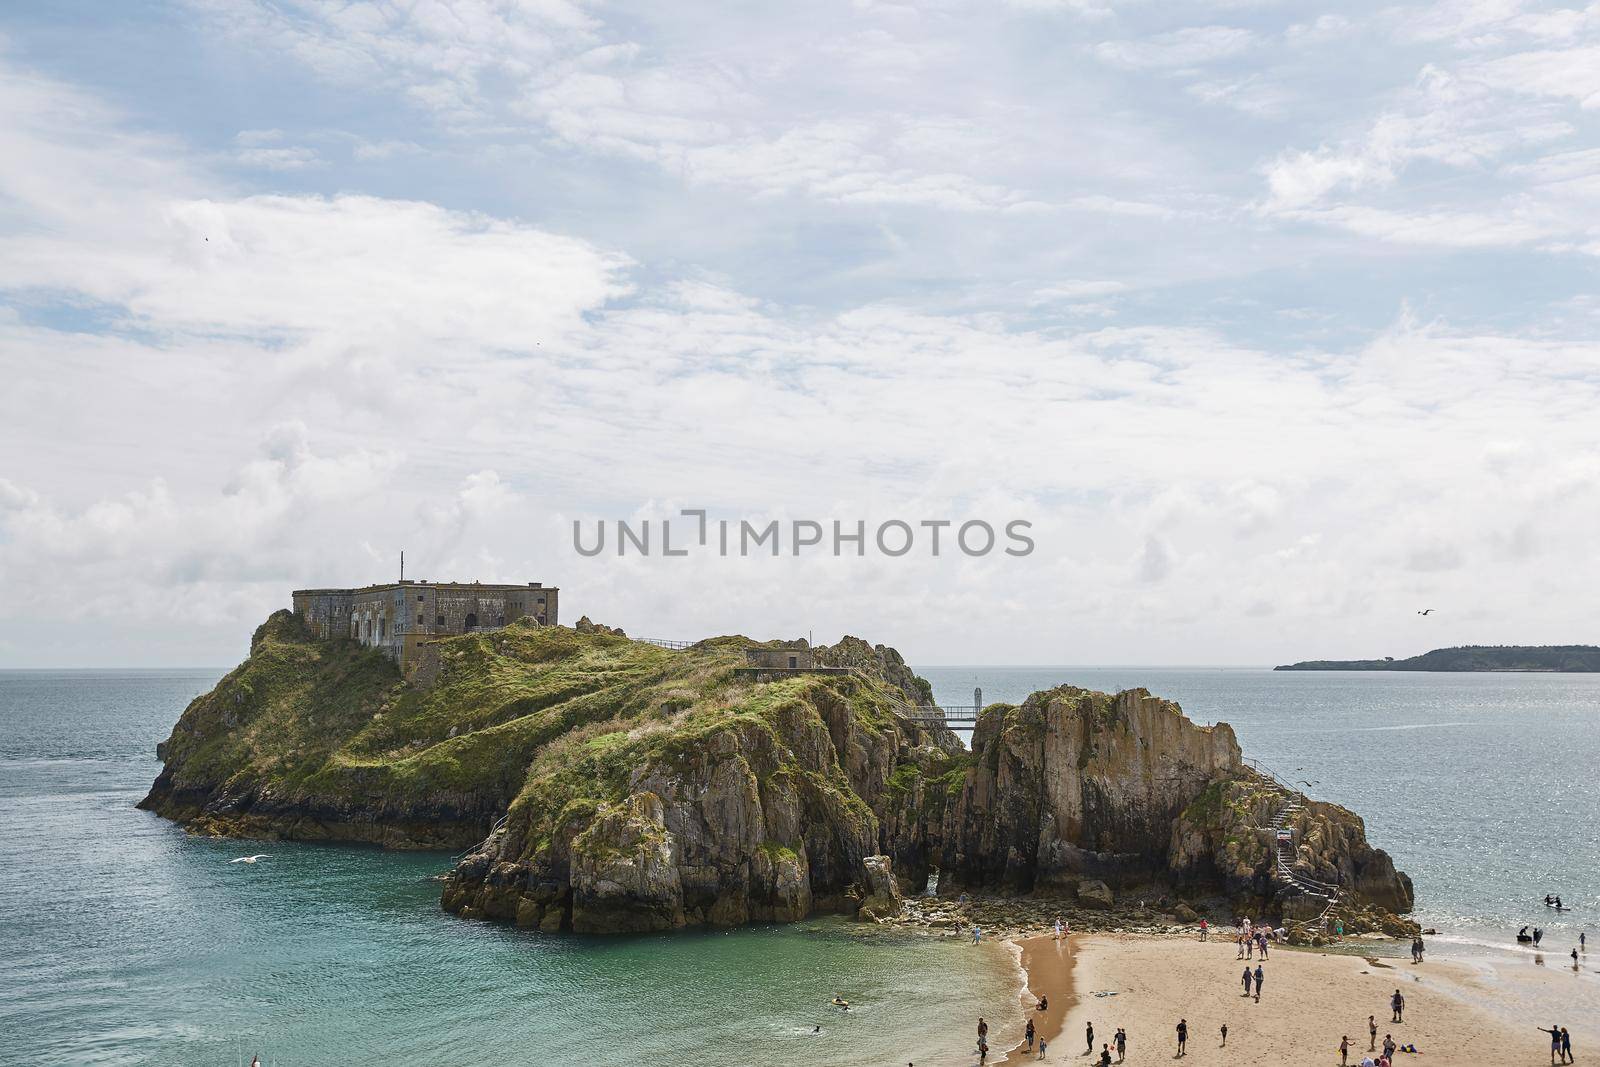 People at the beach in Tenby, an ancient walled town; now a tourist destination in the county of Pembrokeshire, south Wales, UK.